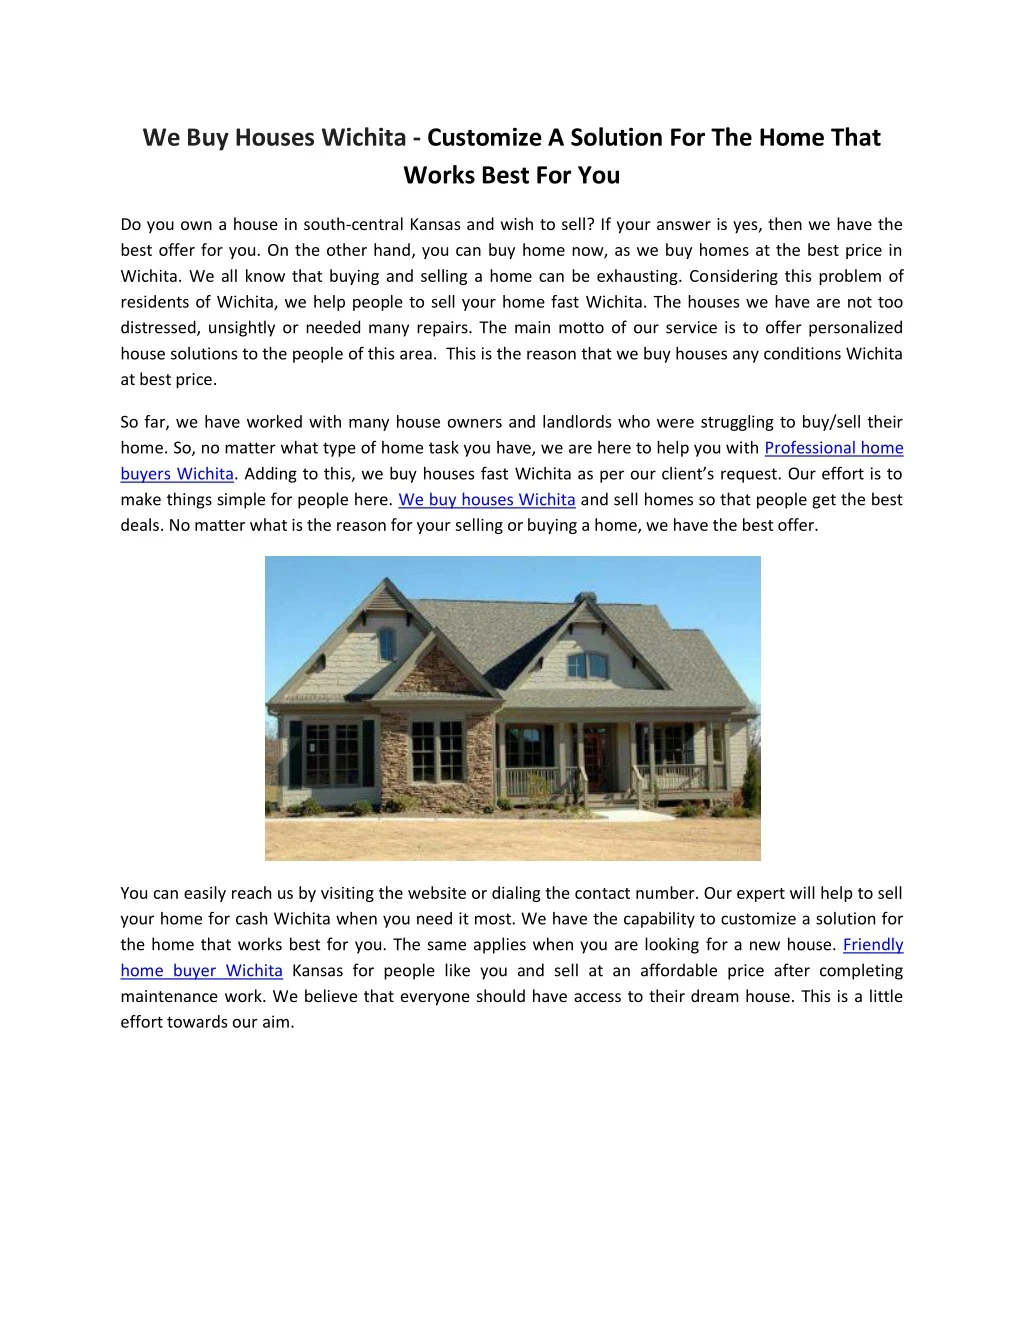 we buy houses wichita customize a solution